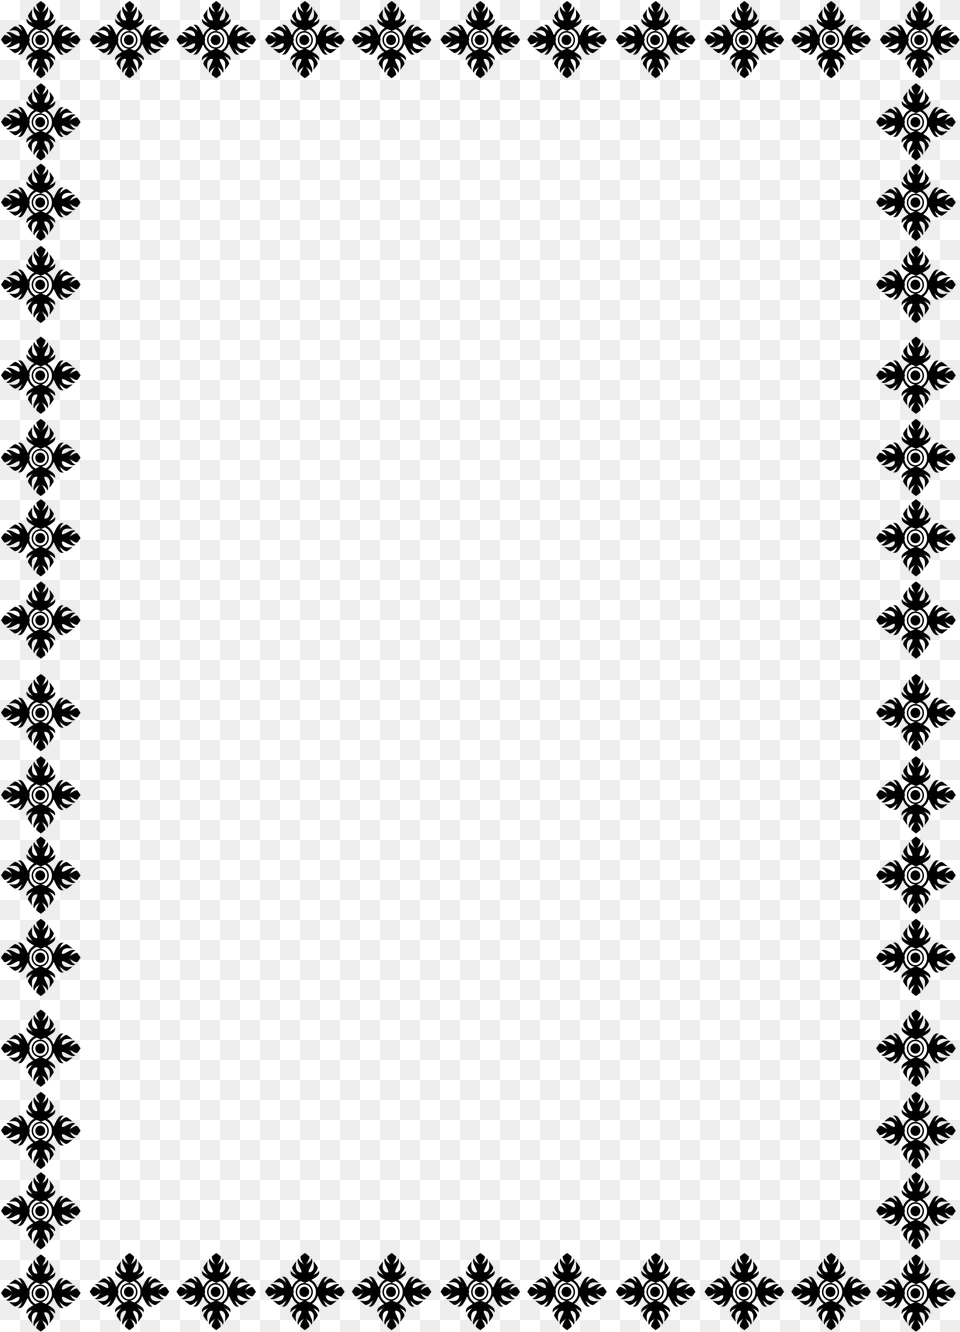 Vector Border Designs Free Background Christmas Present Border Free, Text, Blackboard, Home Decor Png